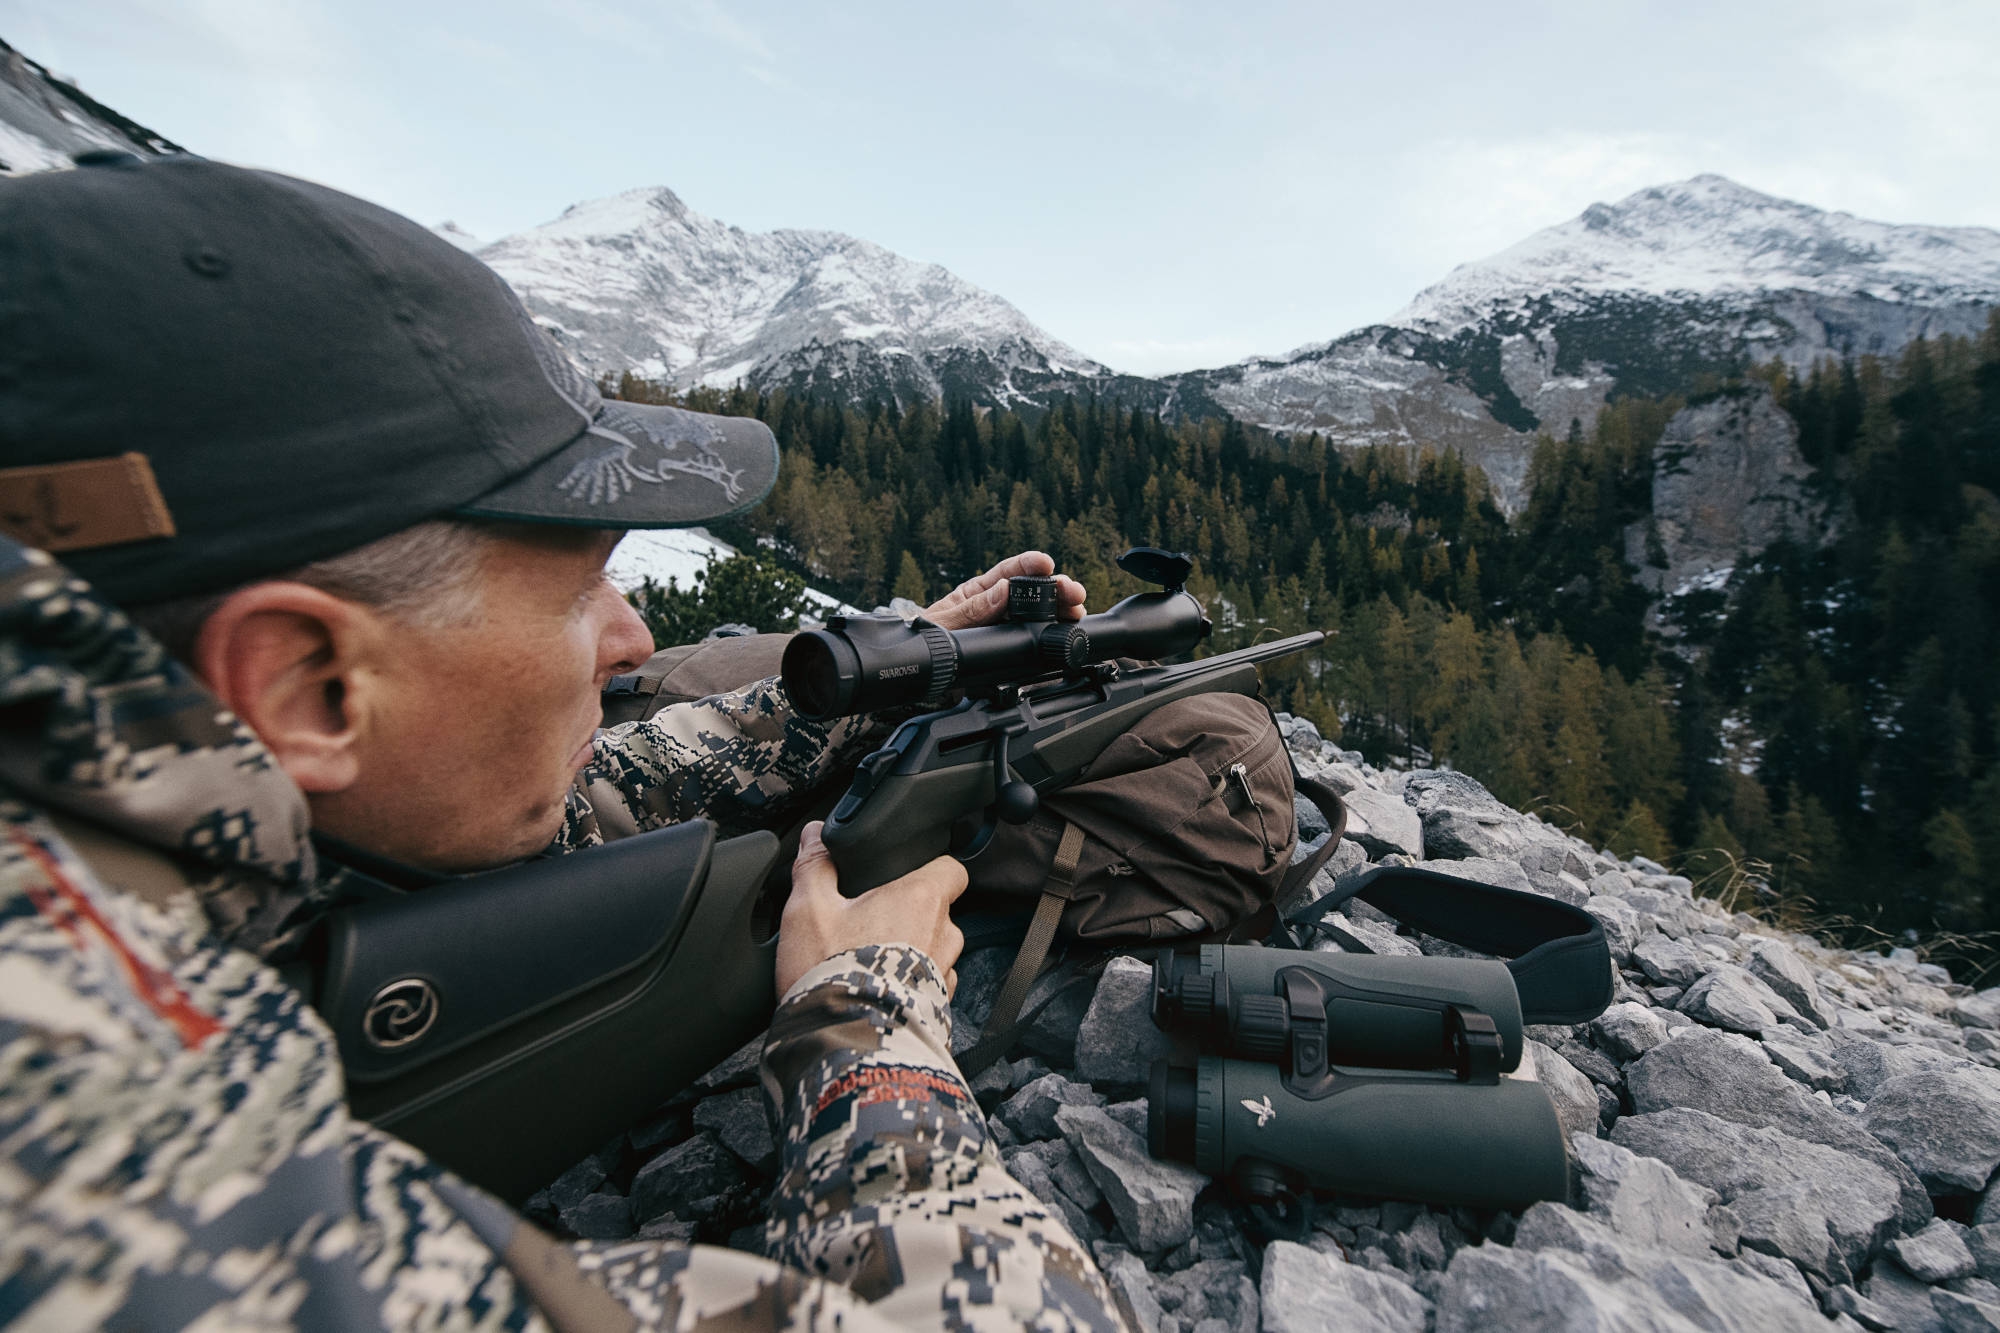 Jeg vil have tabe Meddele News from Swarovski Optik: the dS 5-25x52 P scope enters its 2nd generation  and a high-tech update for the EL Range binos | all4shooters